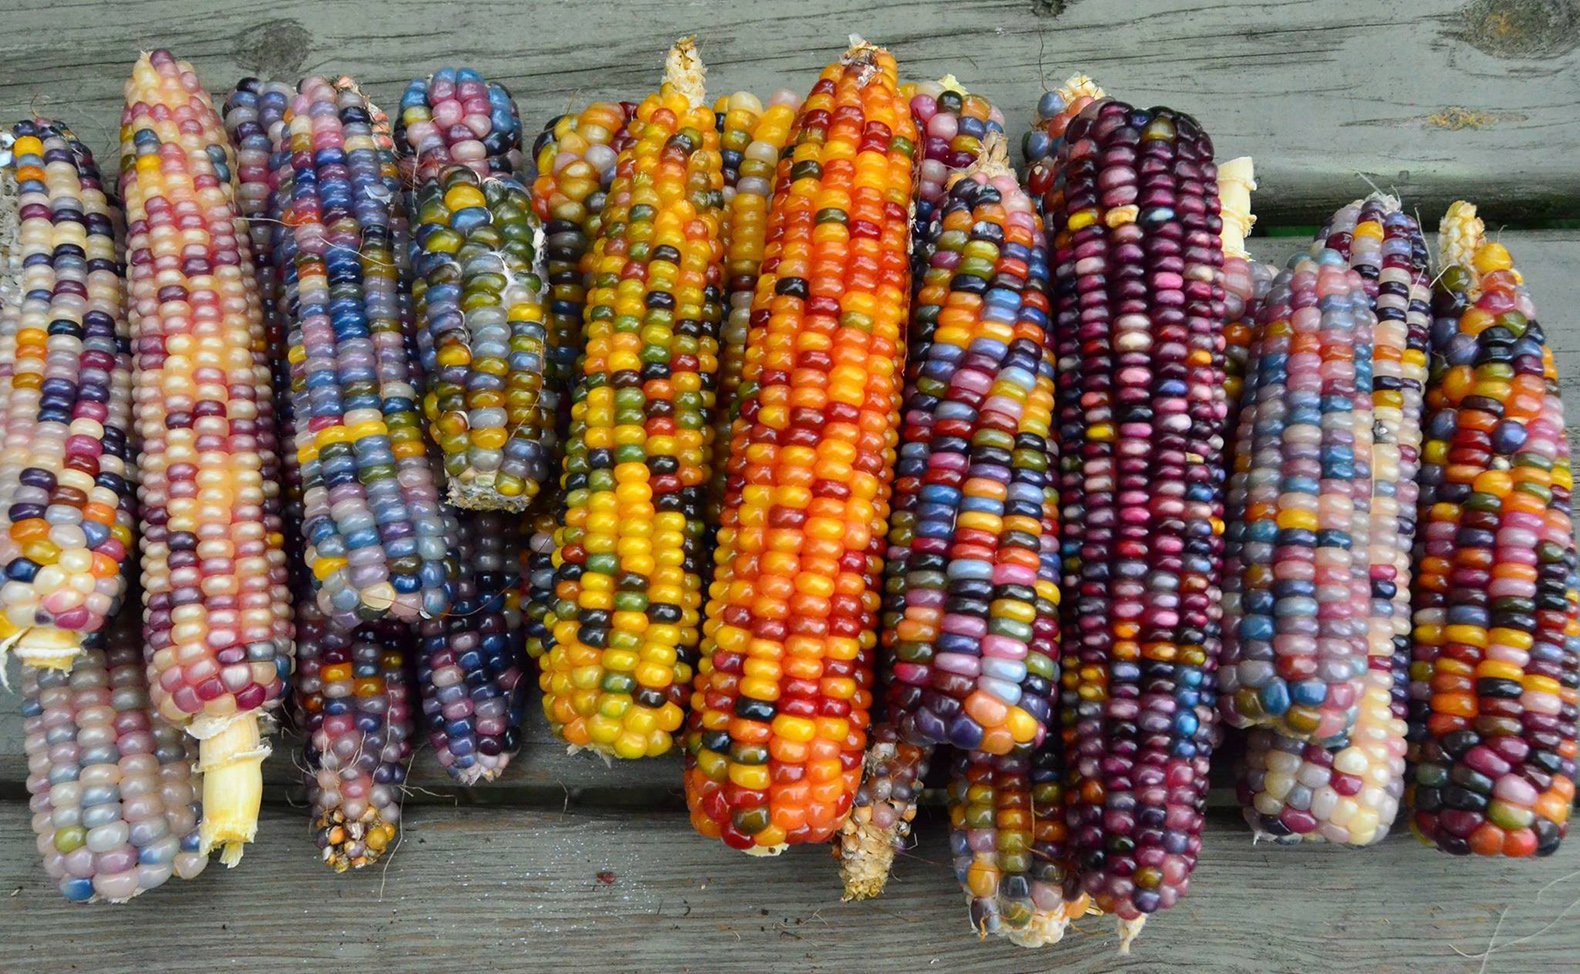 Peru produces more than 55 varieties of corn with the different range of colors.